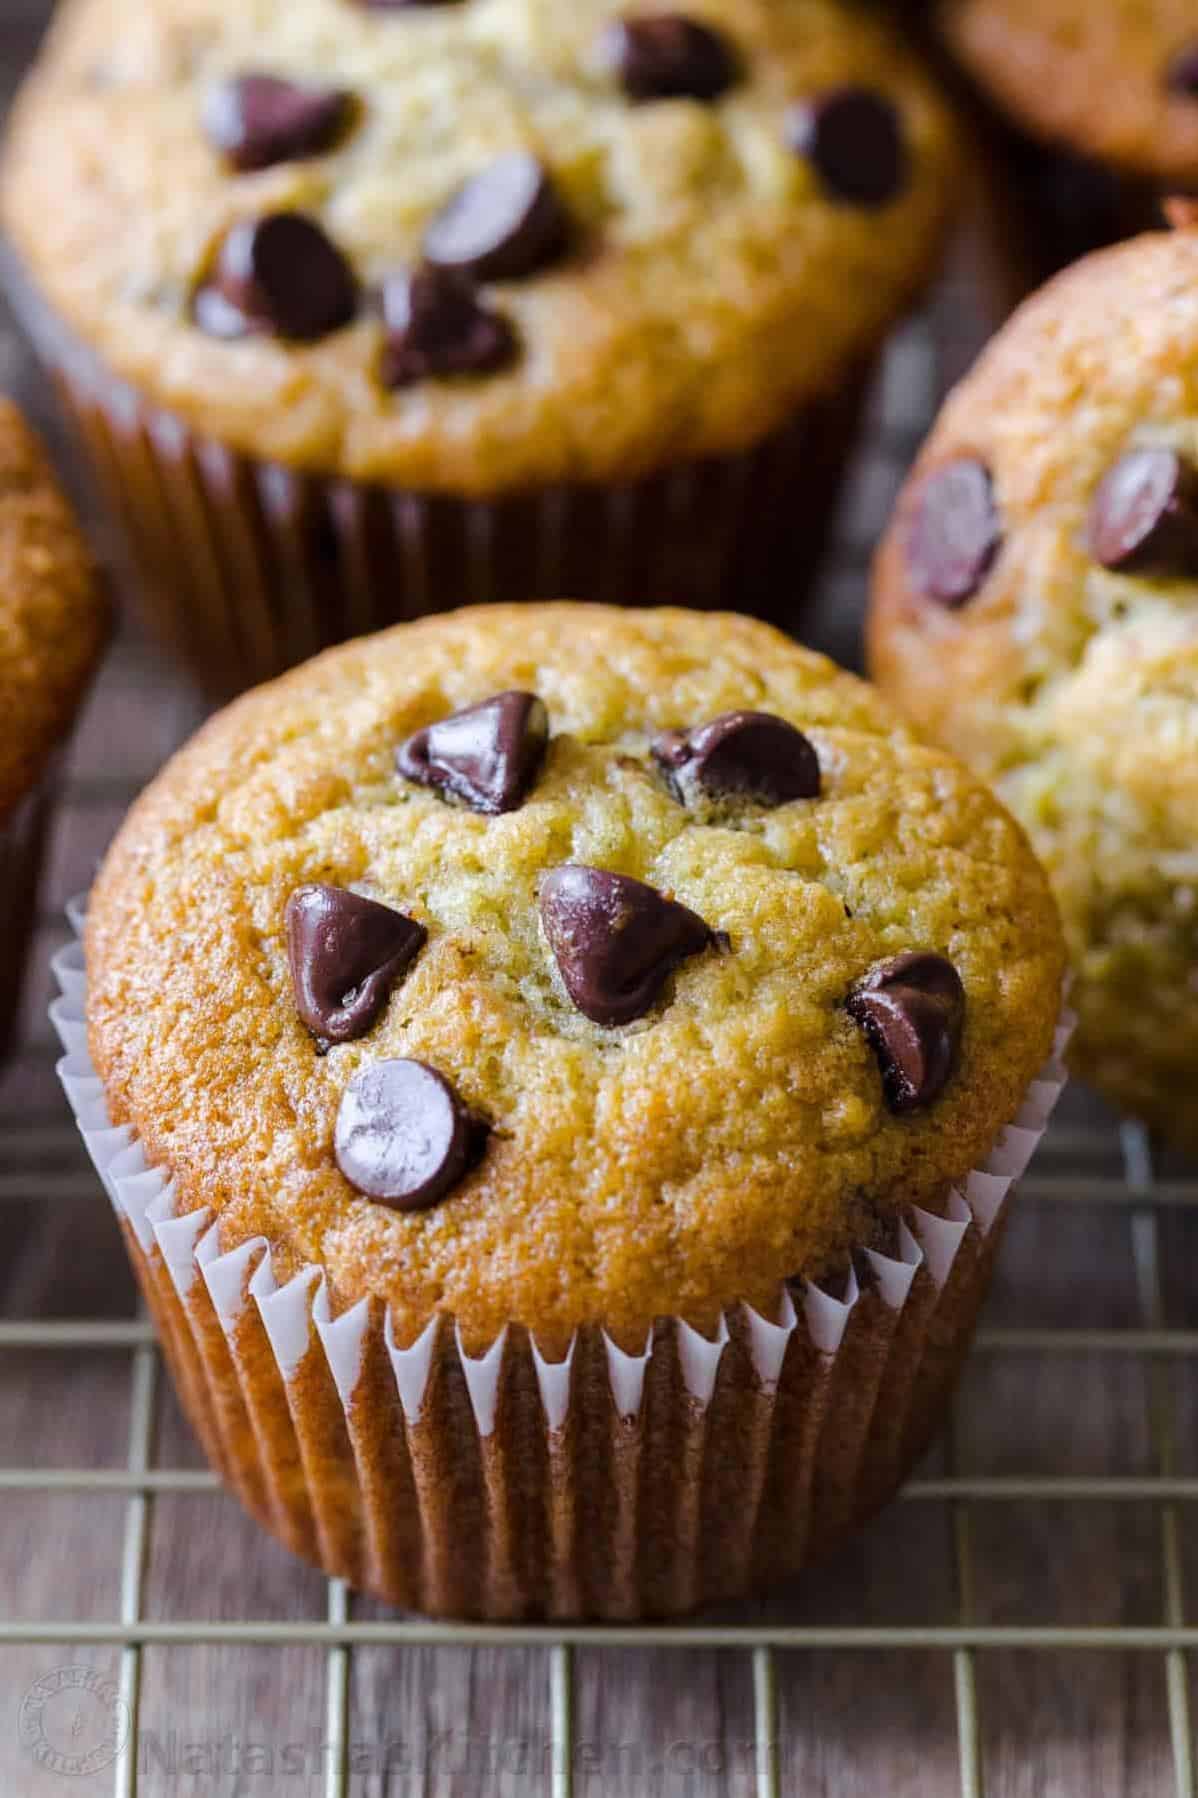  These muffins are so moist and fluffy, you'll think they're straight from a bakery.